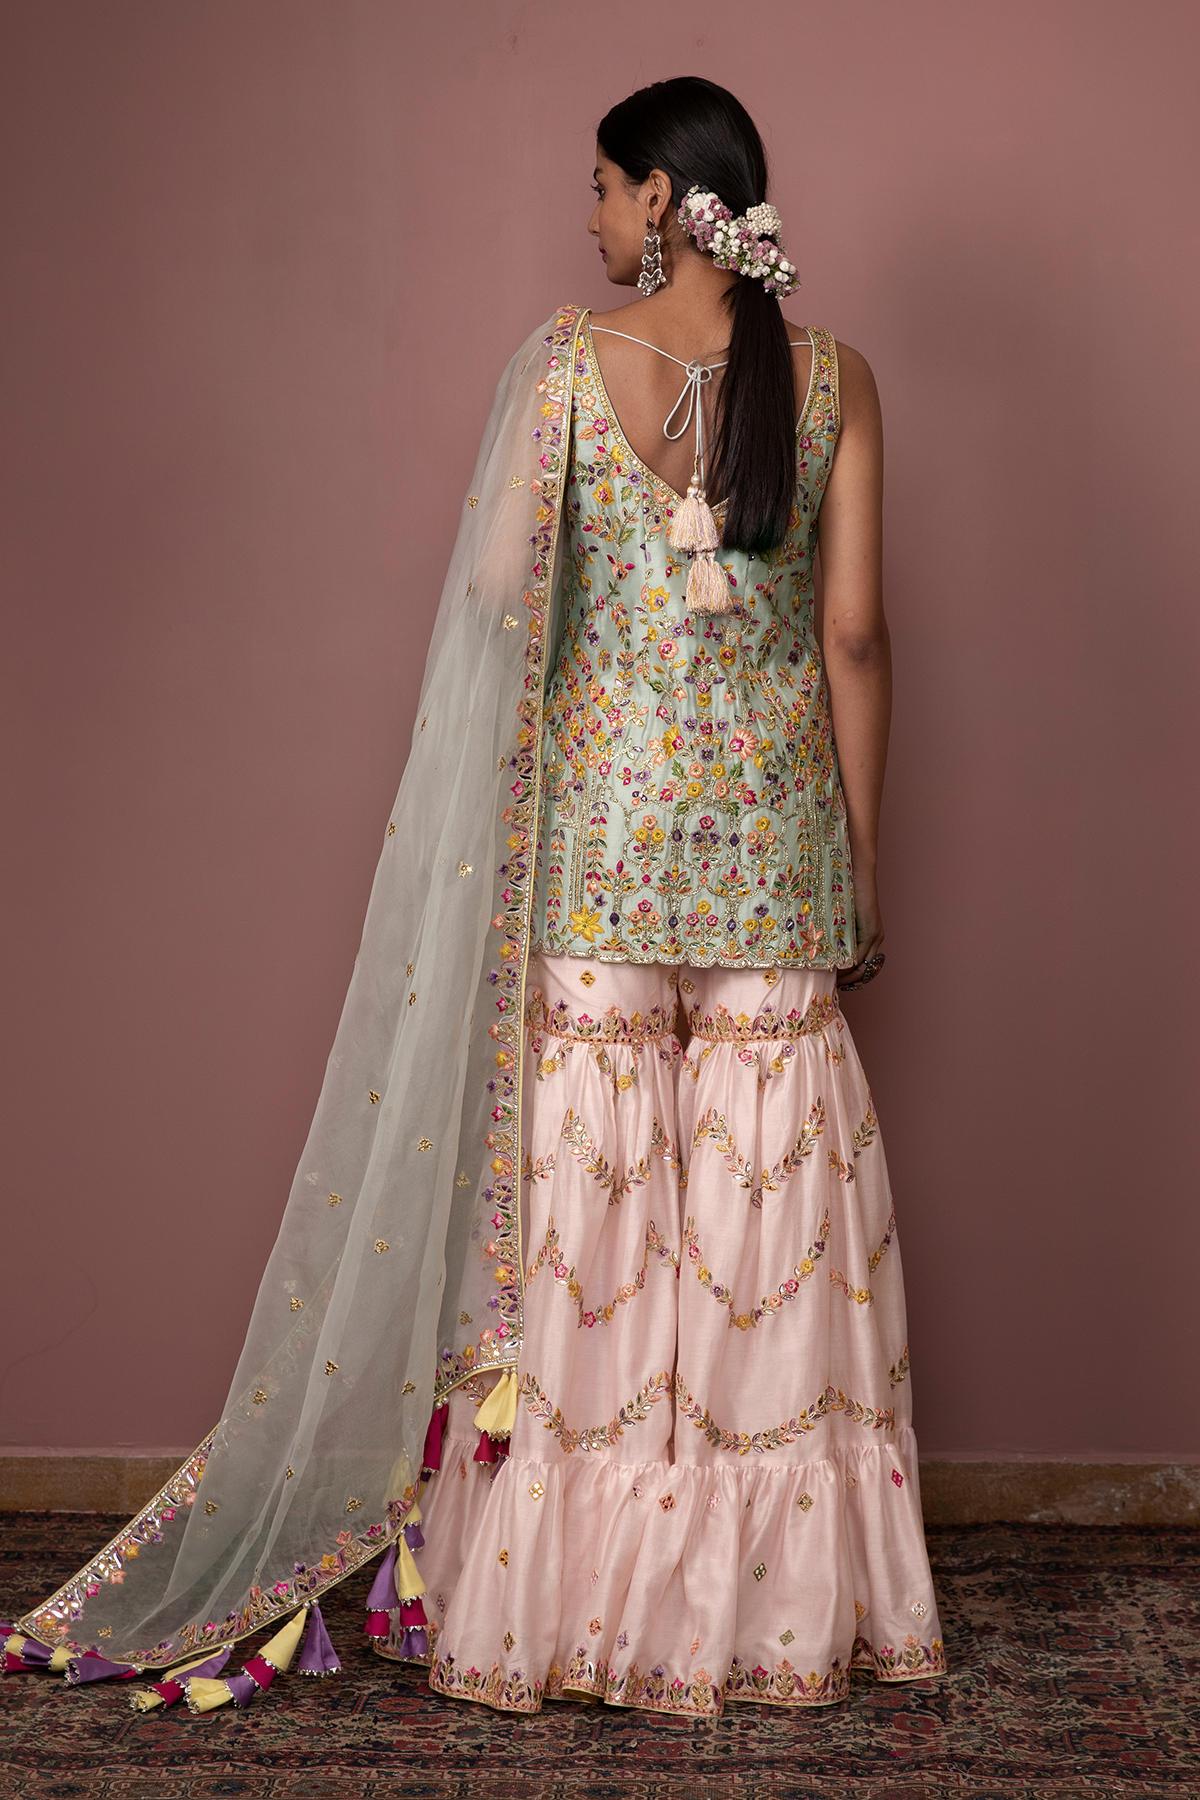 BLUSH PINK CHANDERI LEHENGA WITH FOIL, RESHAM EMBROIDERY - The Grand Trunk